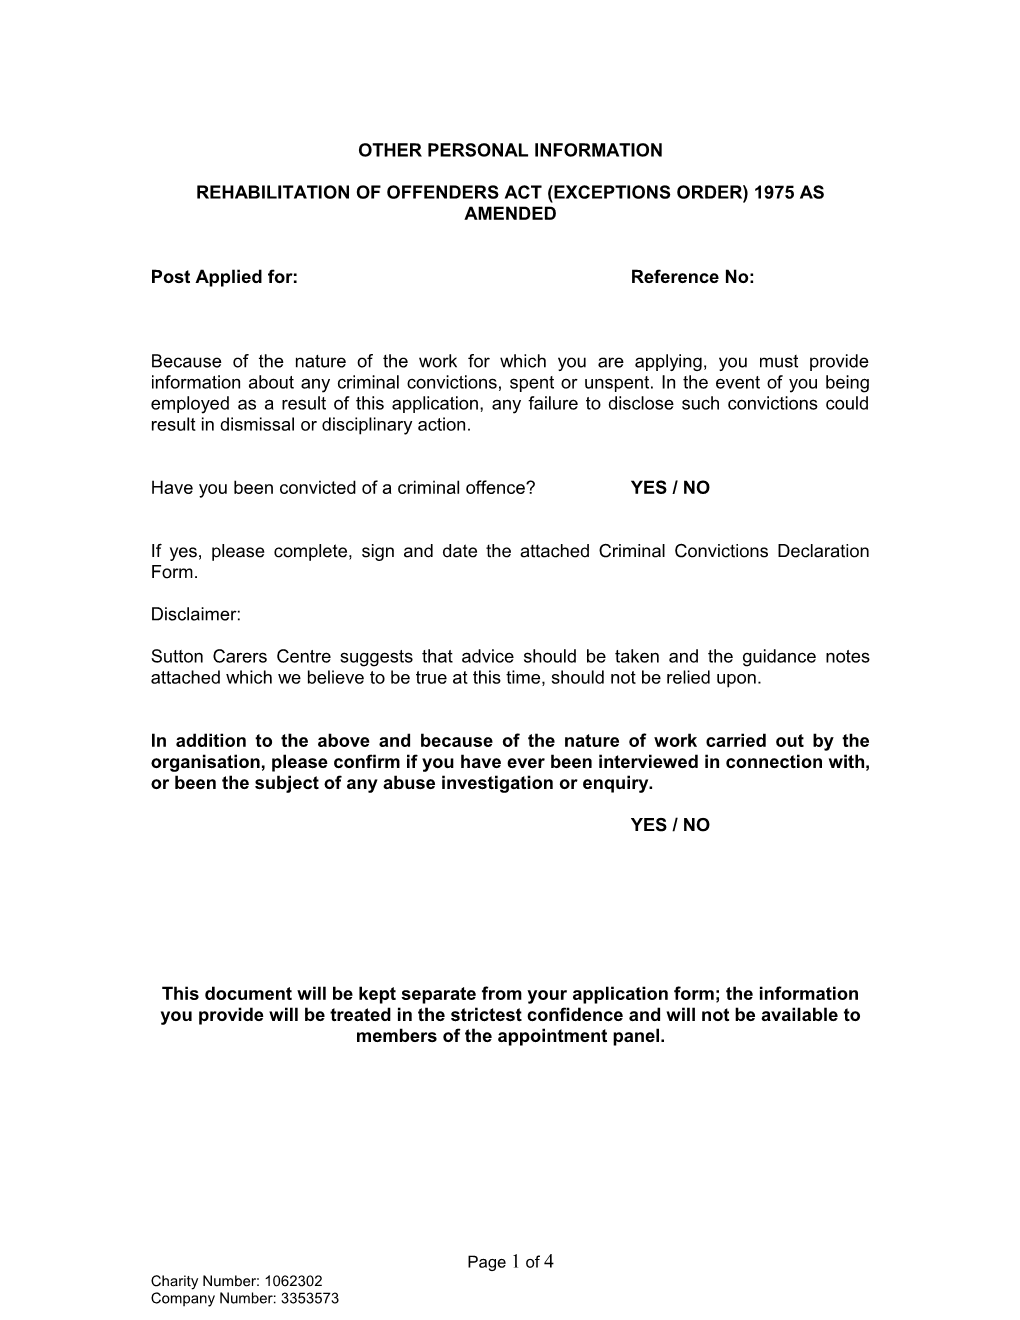 Rehabilitation of Offenders Act (Exceptions Order) 1975 As Amended